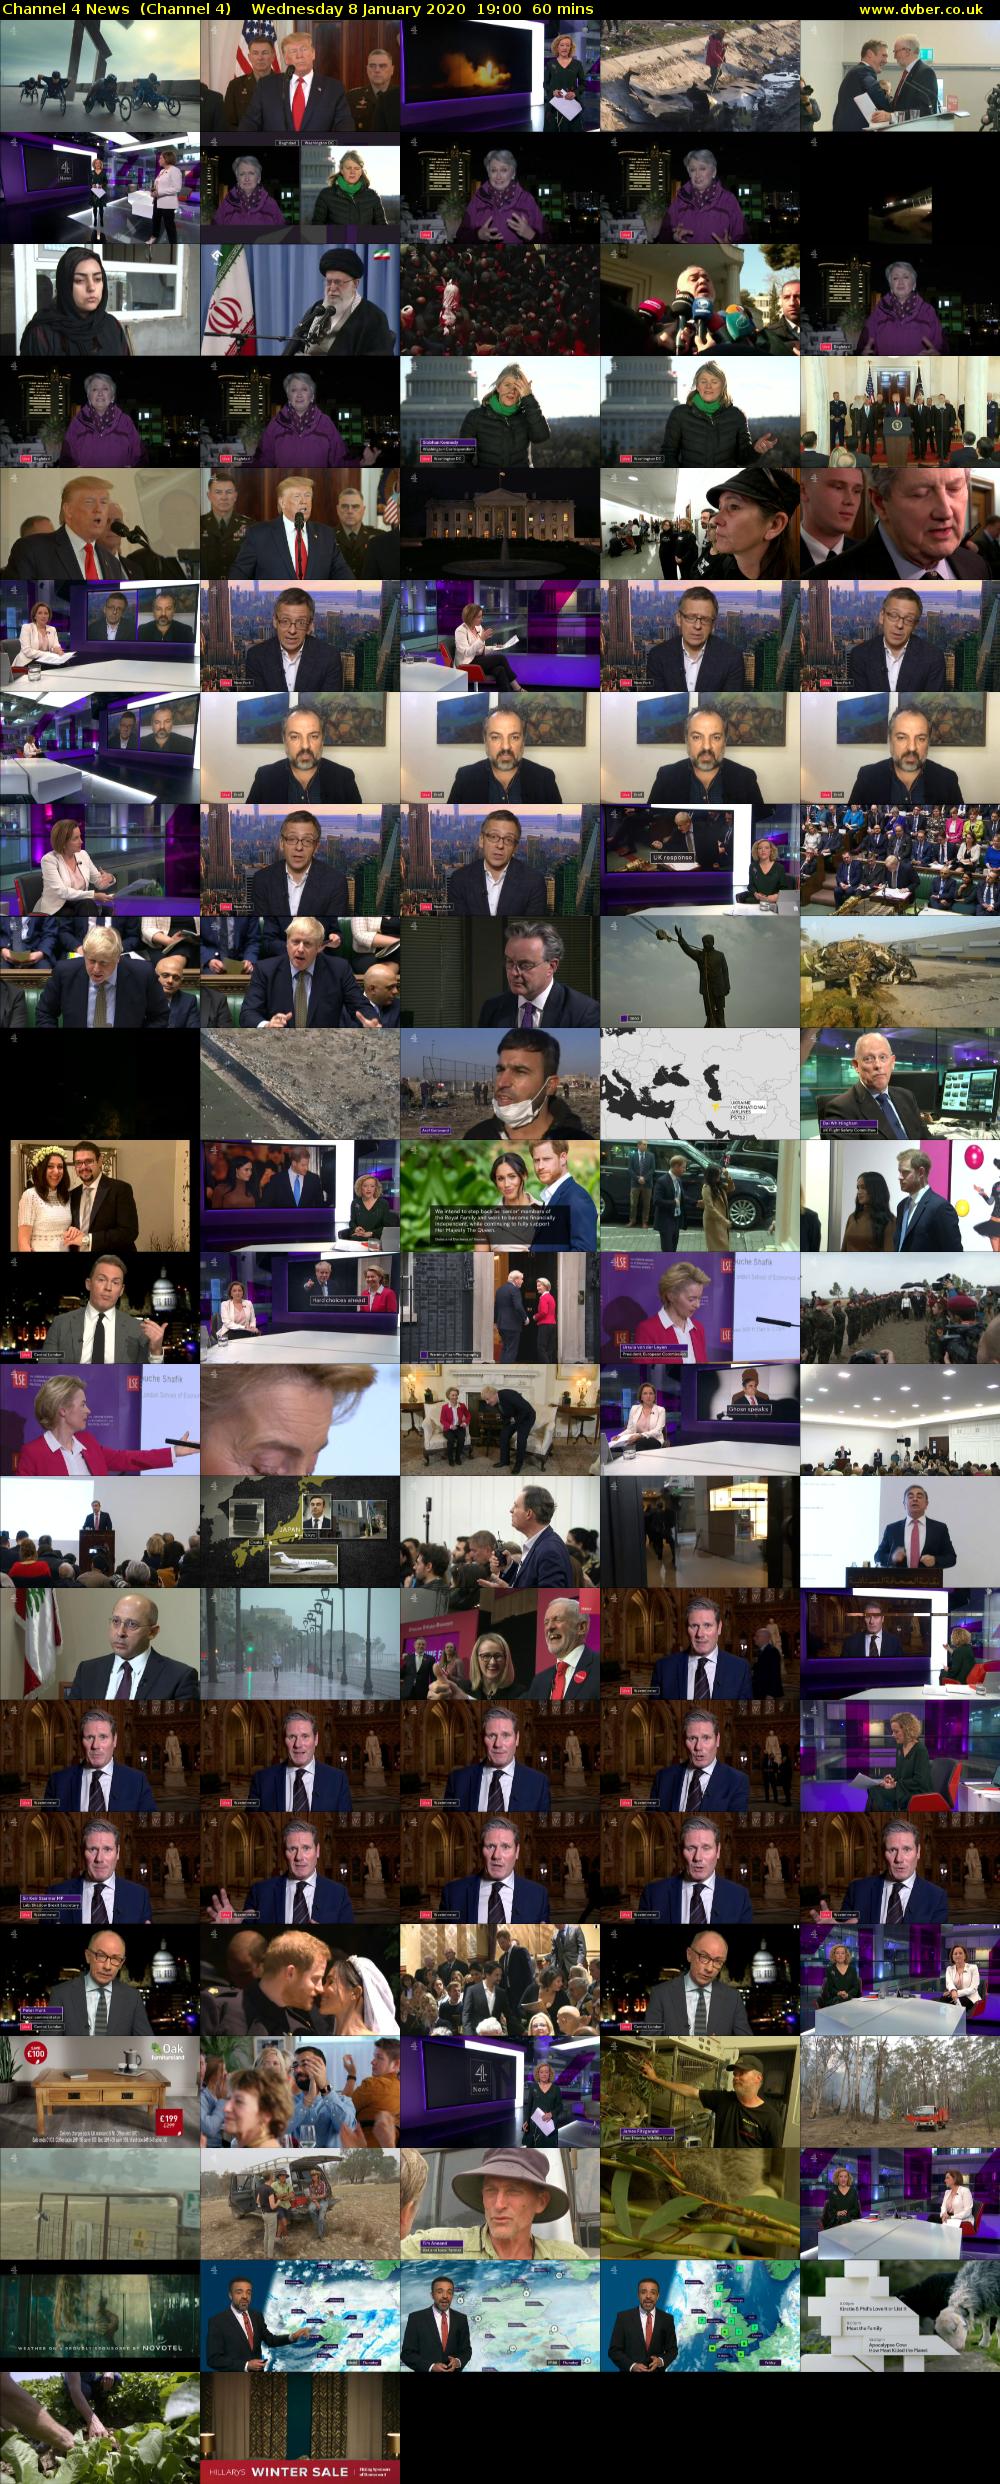 Channel 4 News  (Channel 4) Wednesday 8 January 2020 19:00 - 20:00